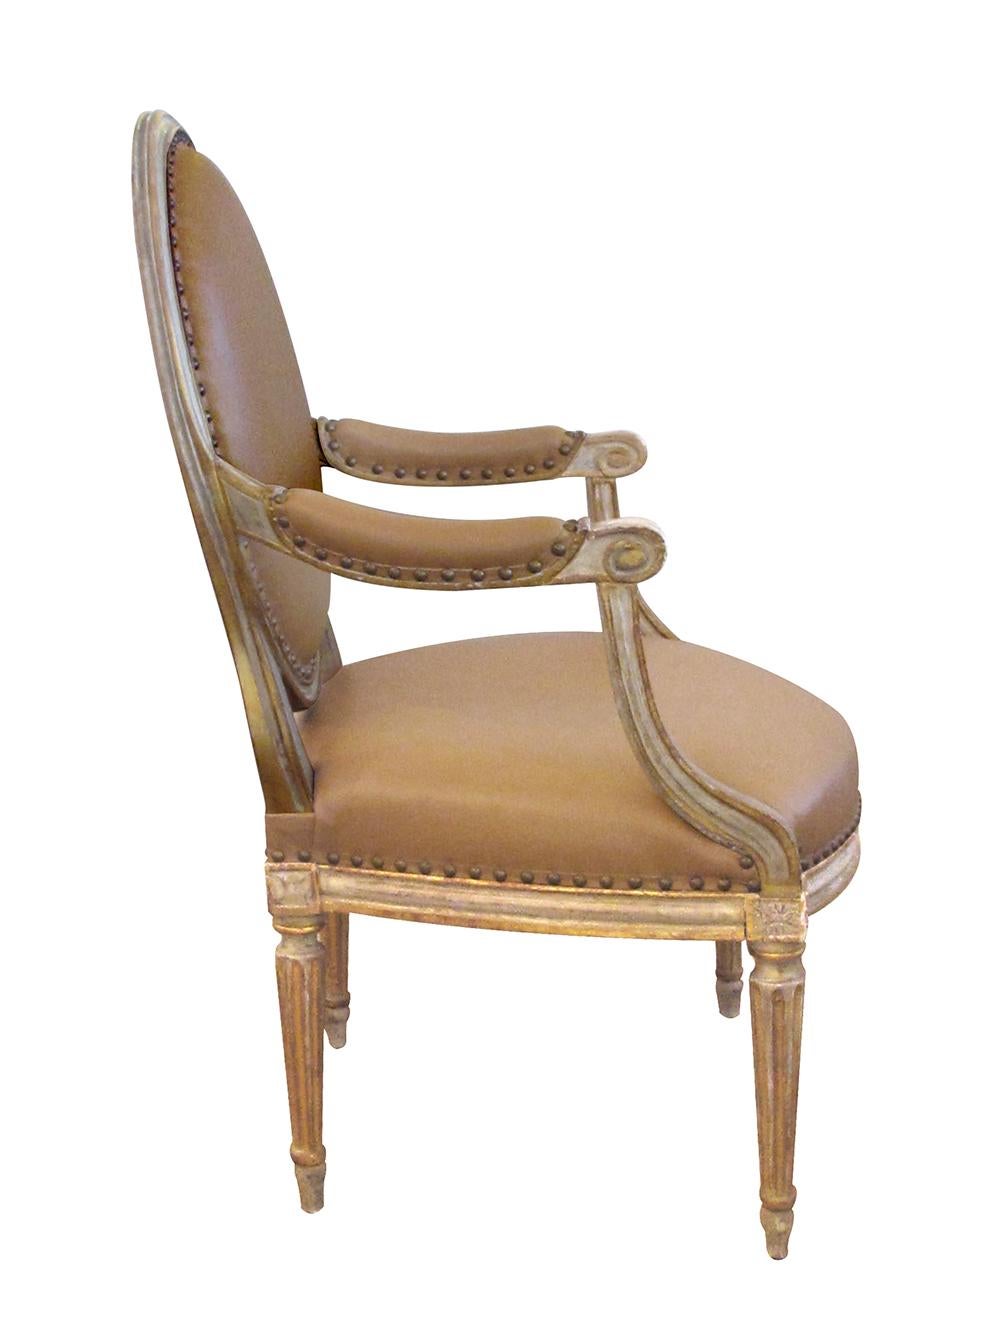 Pair of French Louis XVI Style Grey/Green Painted and Parcel-Gilt Armchairs 1